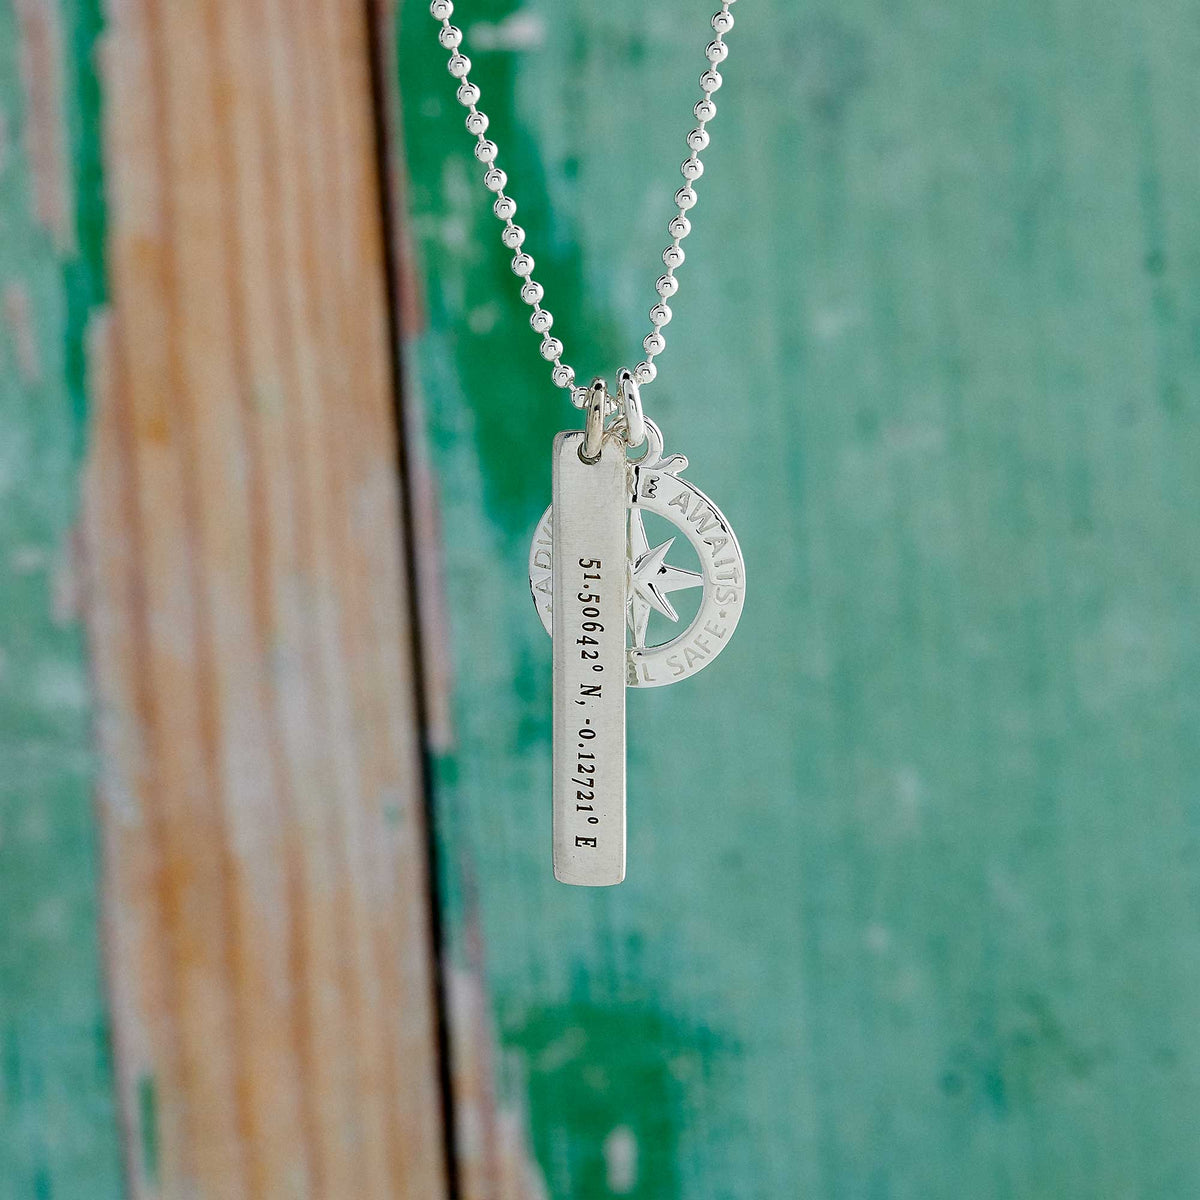 coordinated latitude longitude engraved compass necklace gift for son daughter going away travel gift remind of home